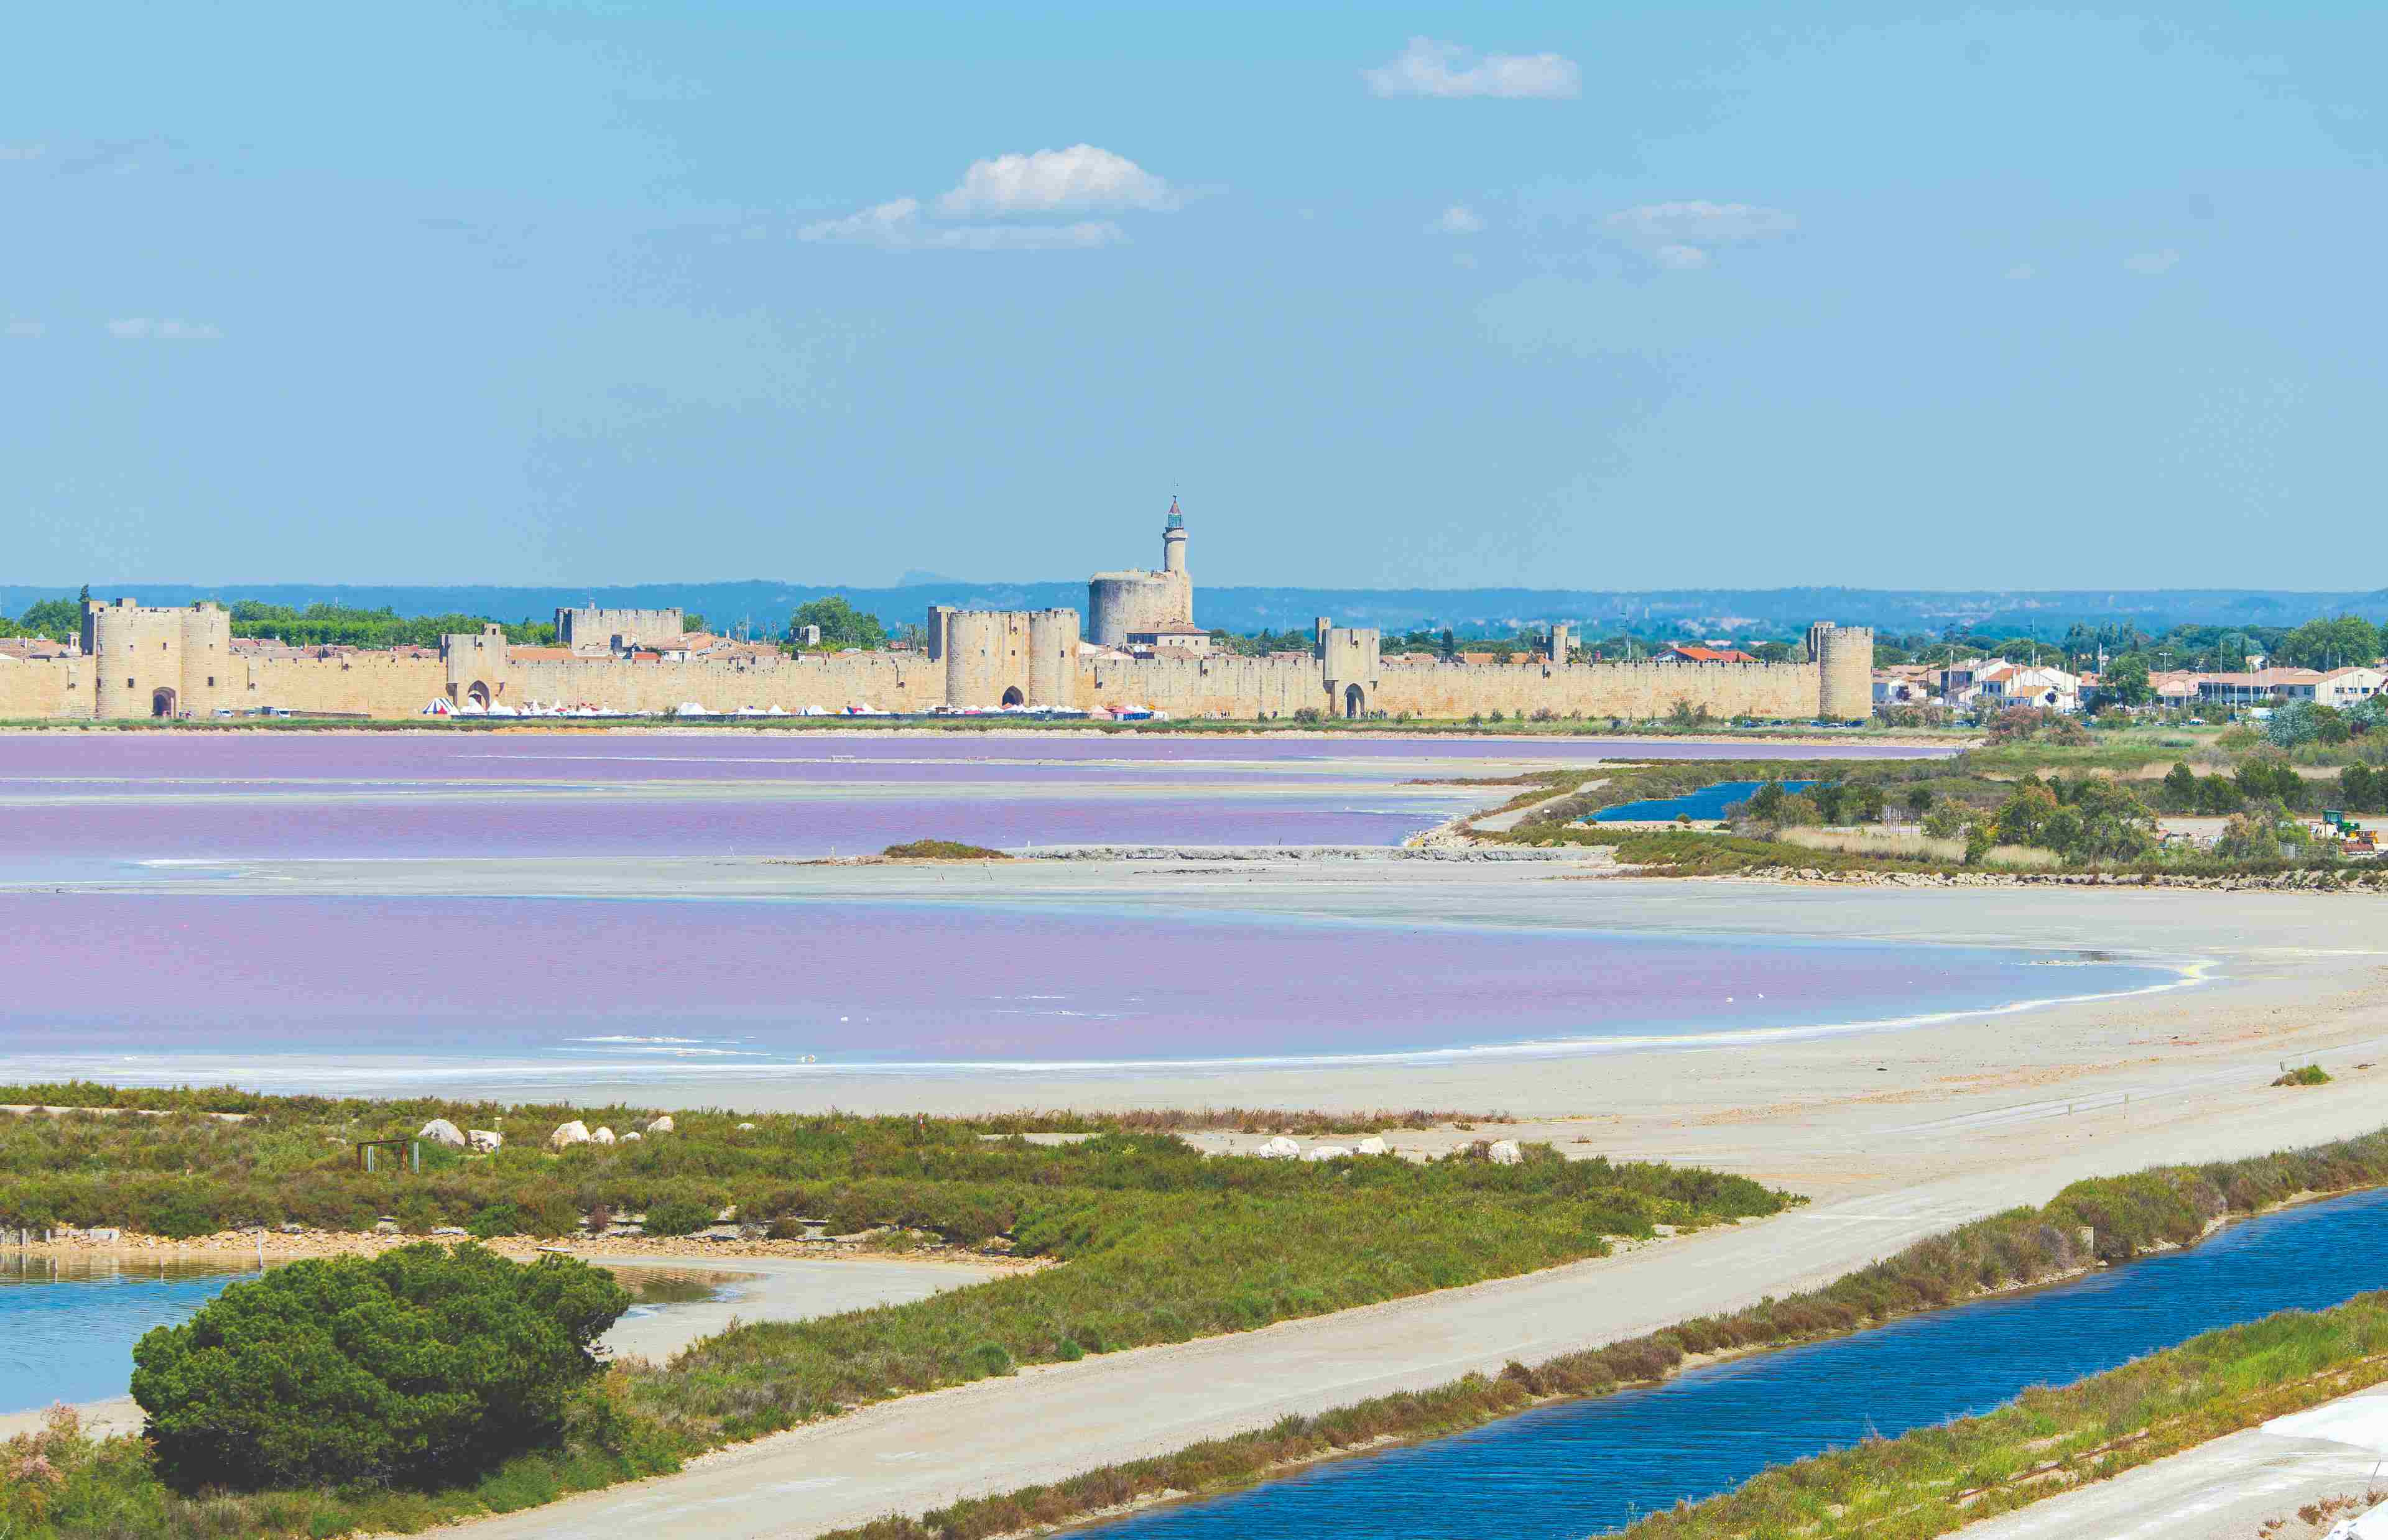 Aigues-Mortes with the salt flats in the foreground (Image: Pascale Gueret/Courtesy of CroisiEurope)